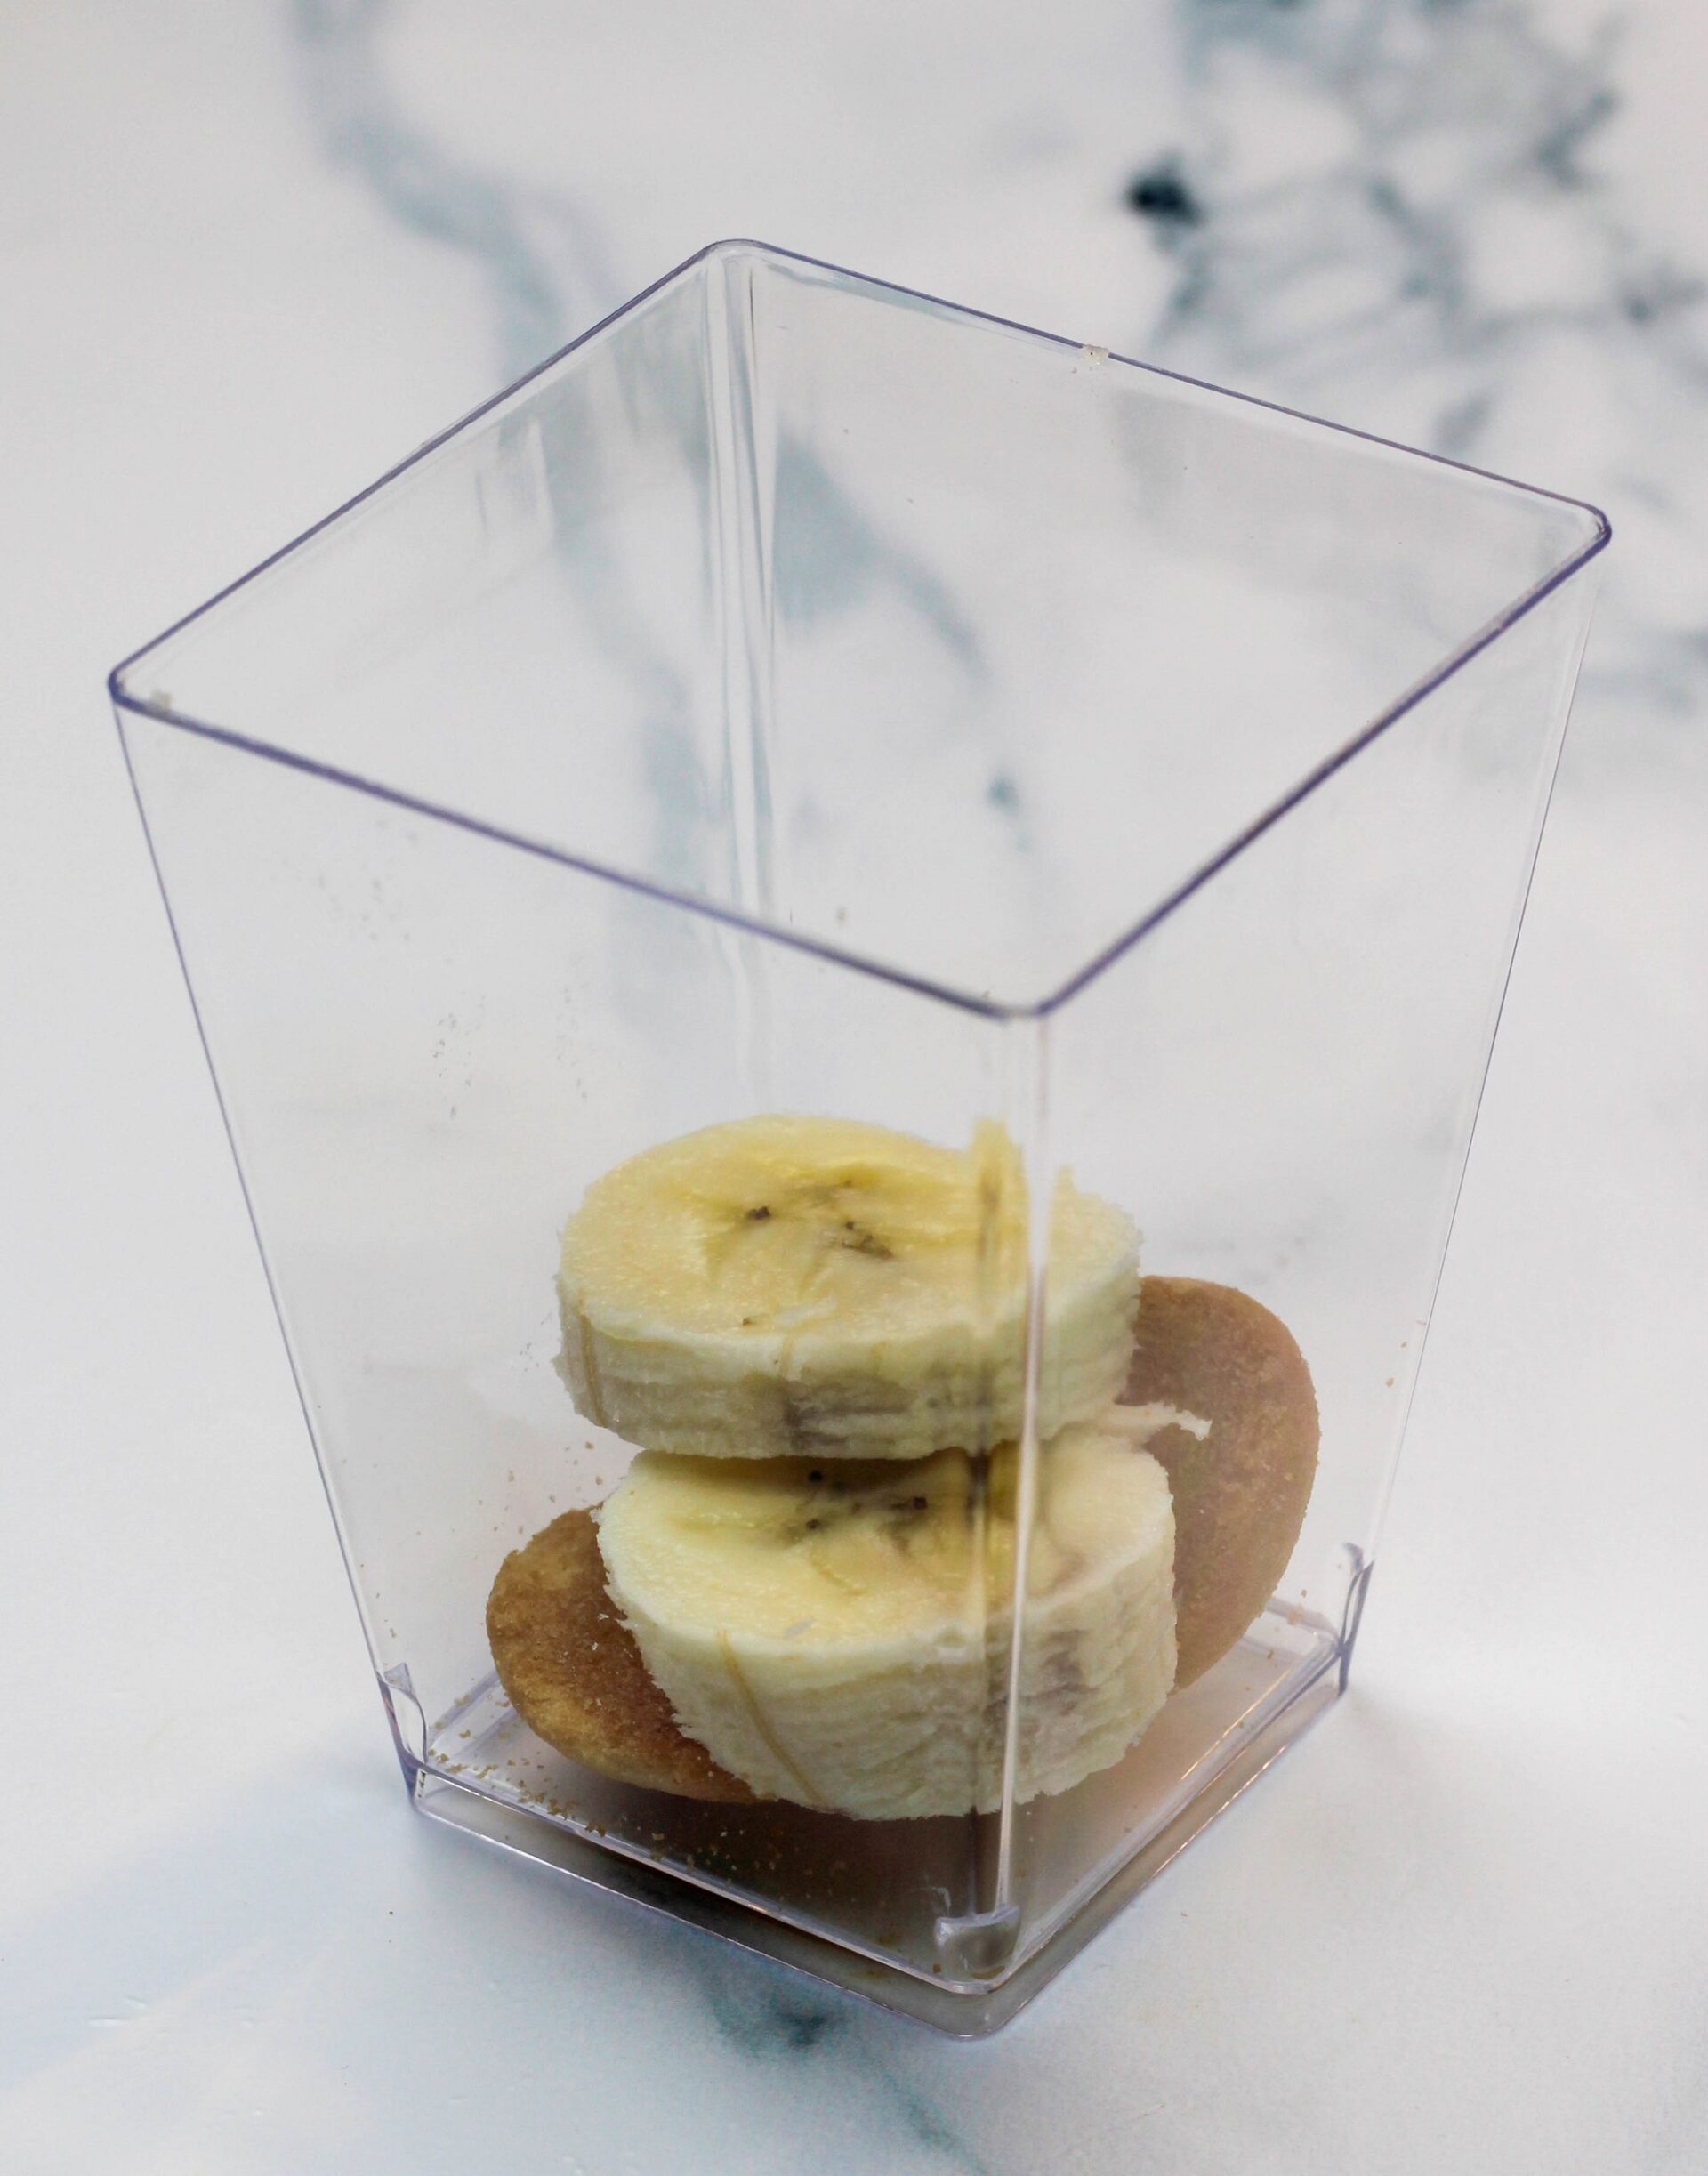 Banana slices and nilla wafers in a rectangular cup.